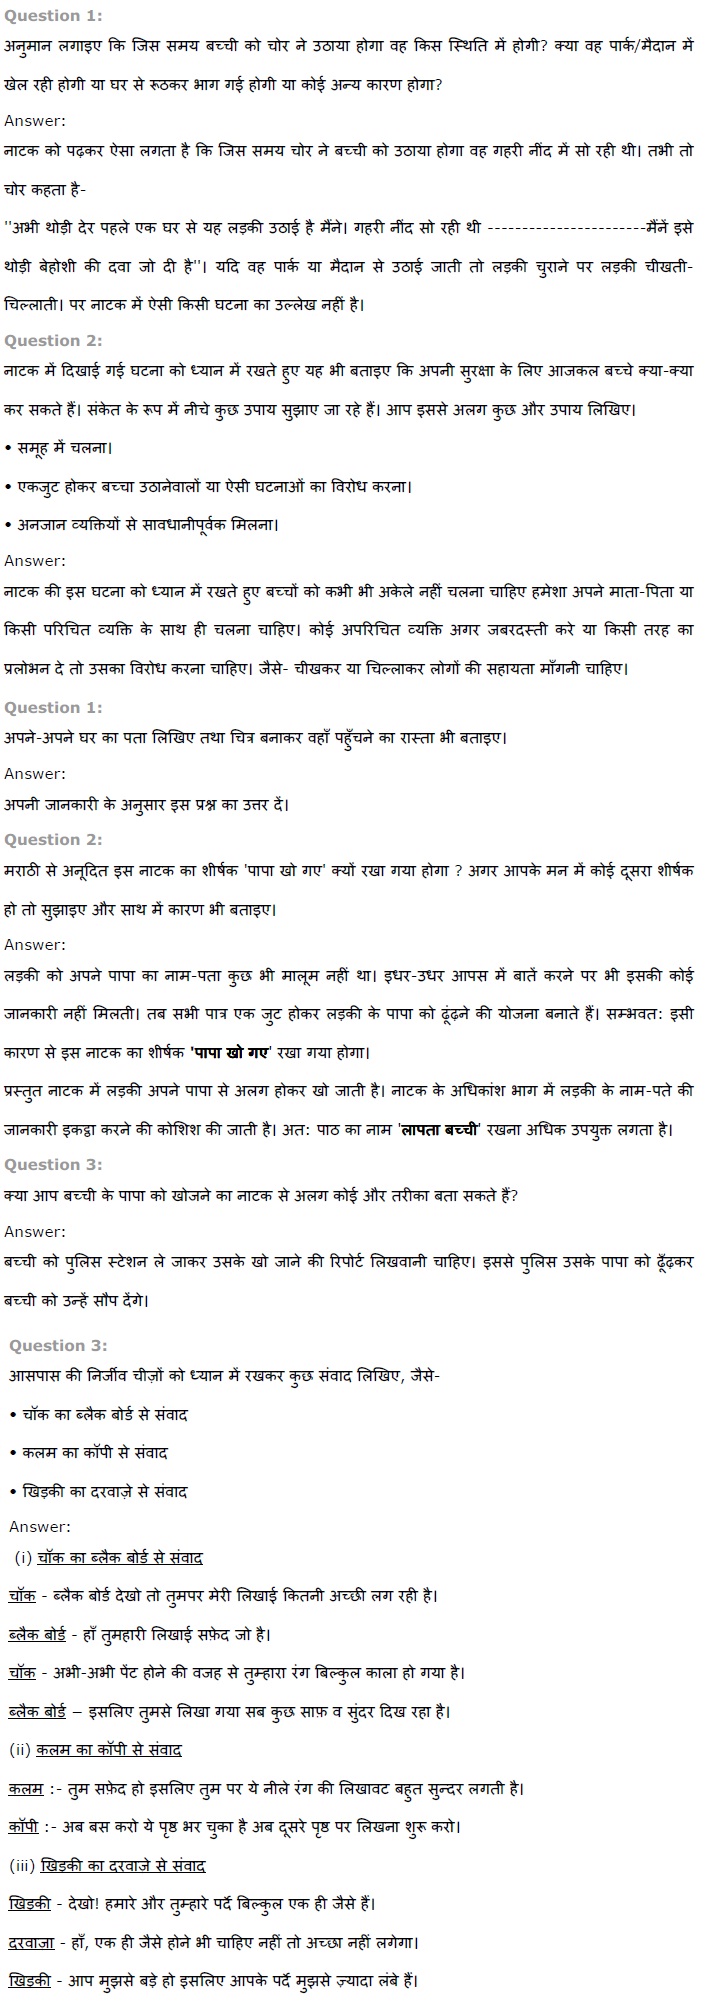 NCERT Solutions for Class 7th Hindi Chapter 7 पापा खो गए